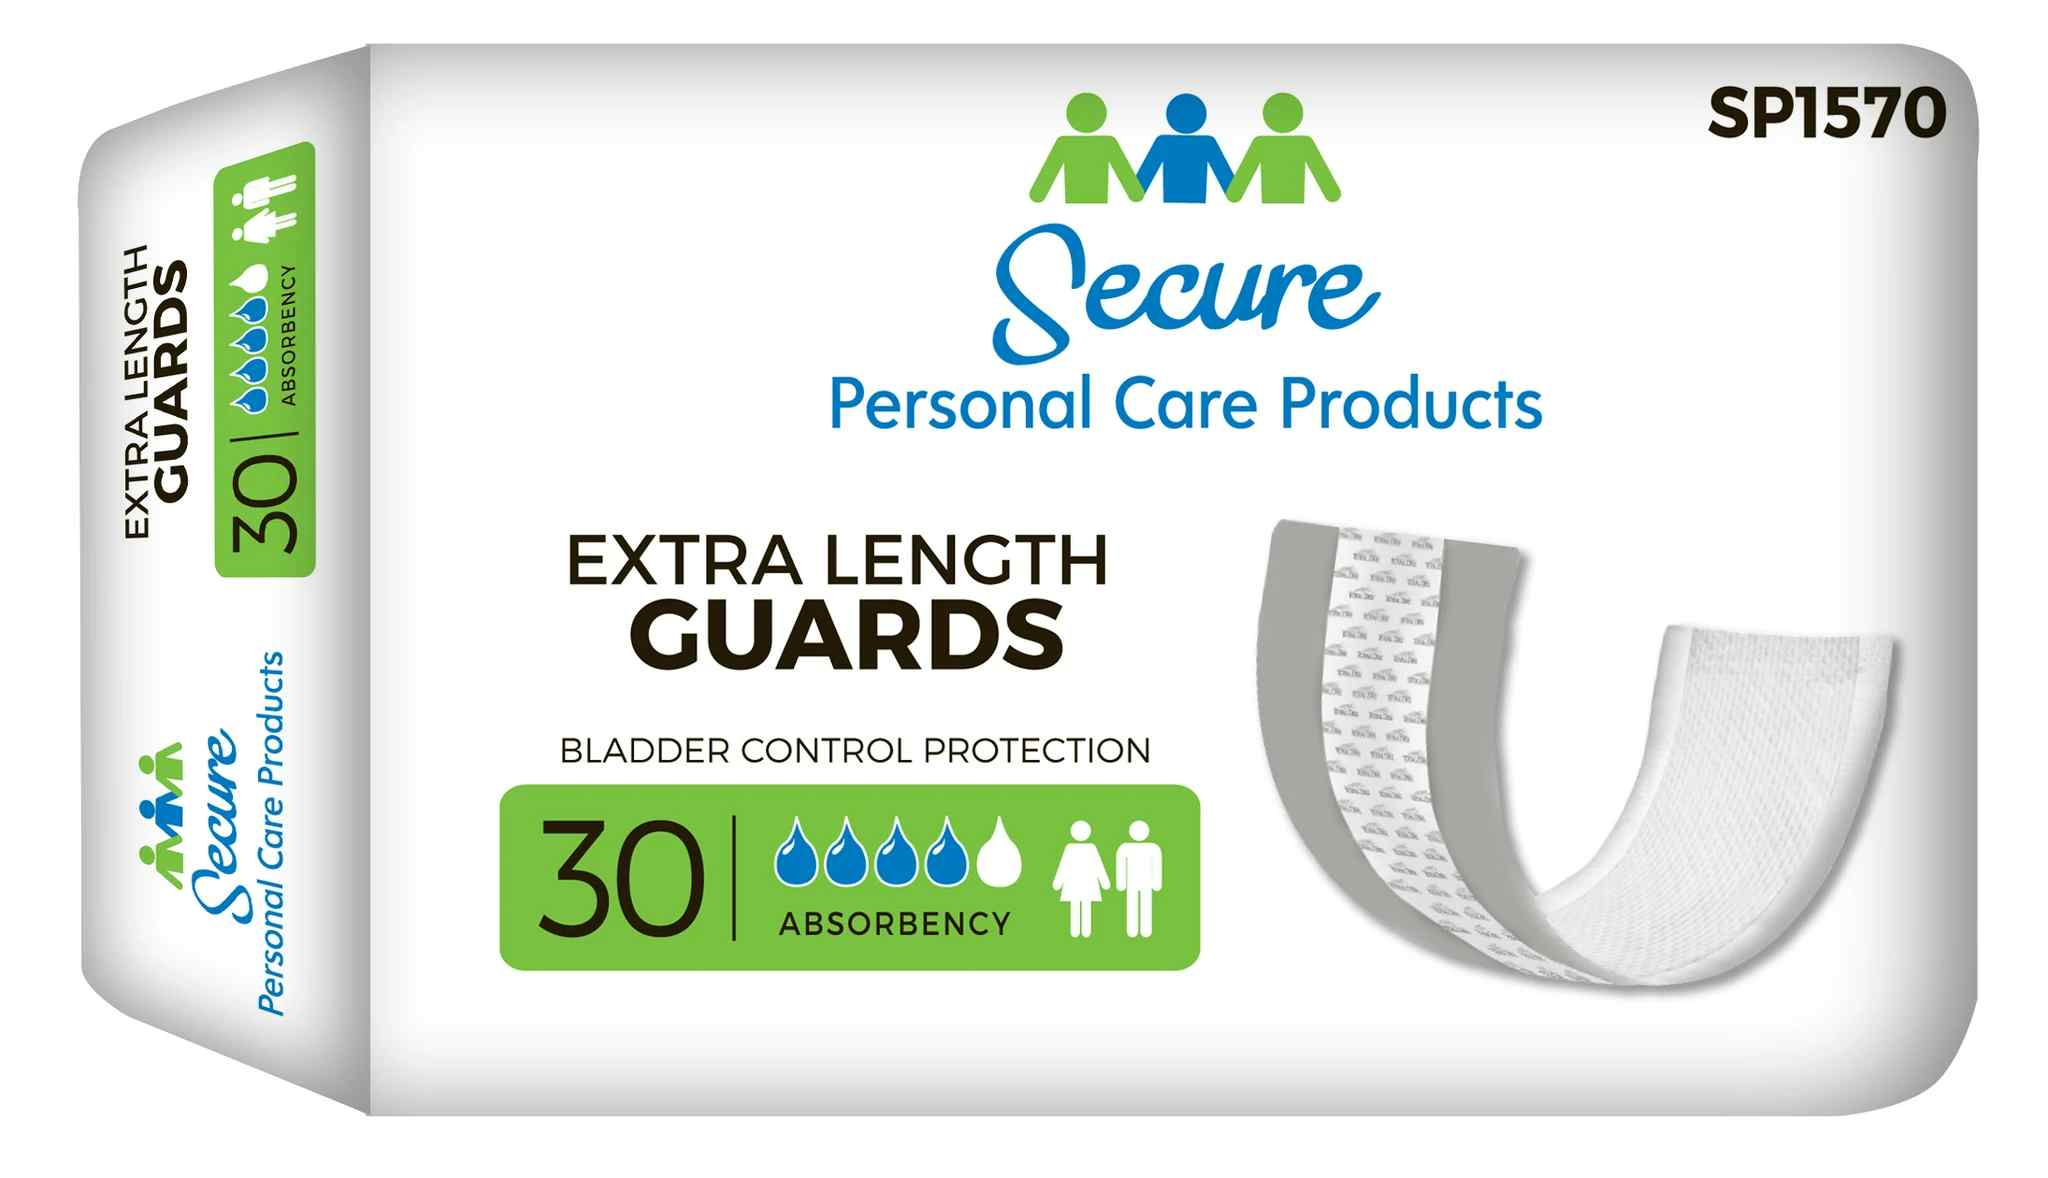 Secure Personal Care Products Extra Length Guards Bladder Control Pads, SP1570, 12" - Case of 180 (6 Bags)